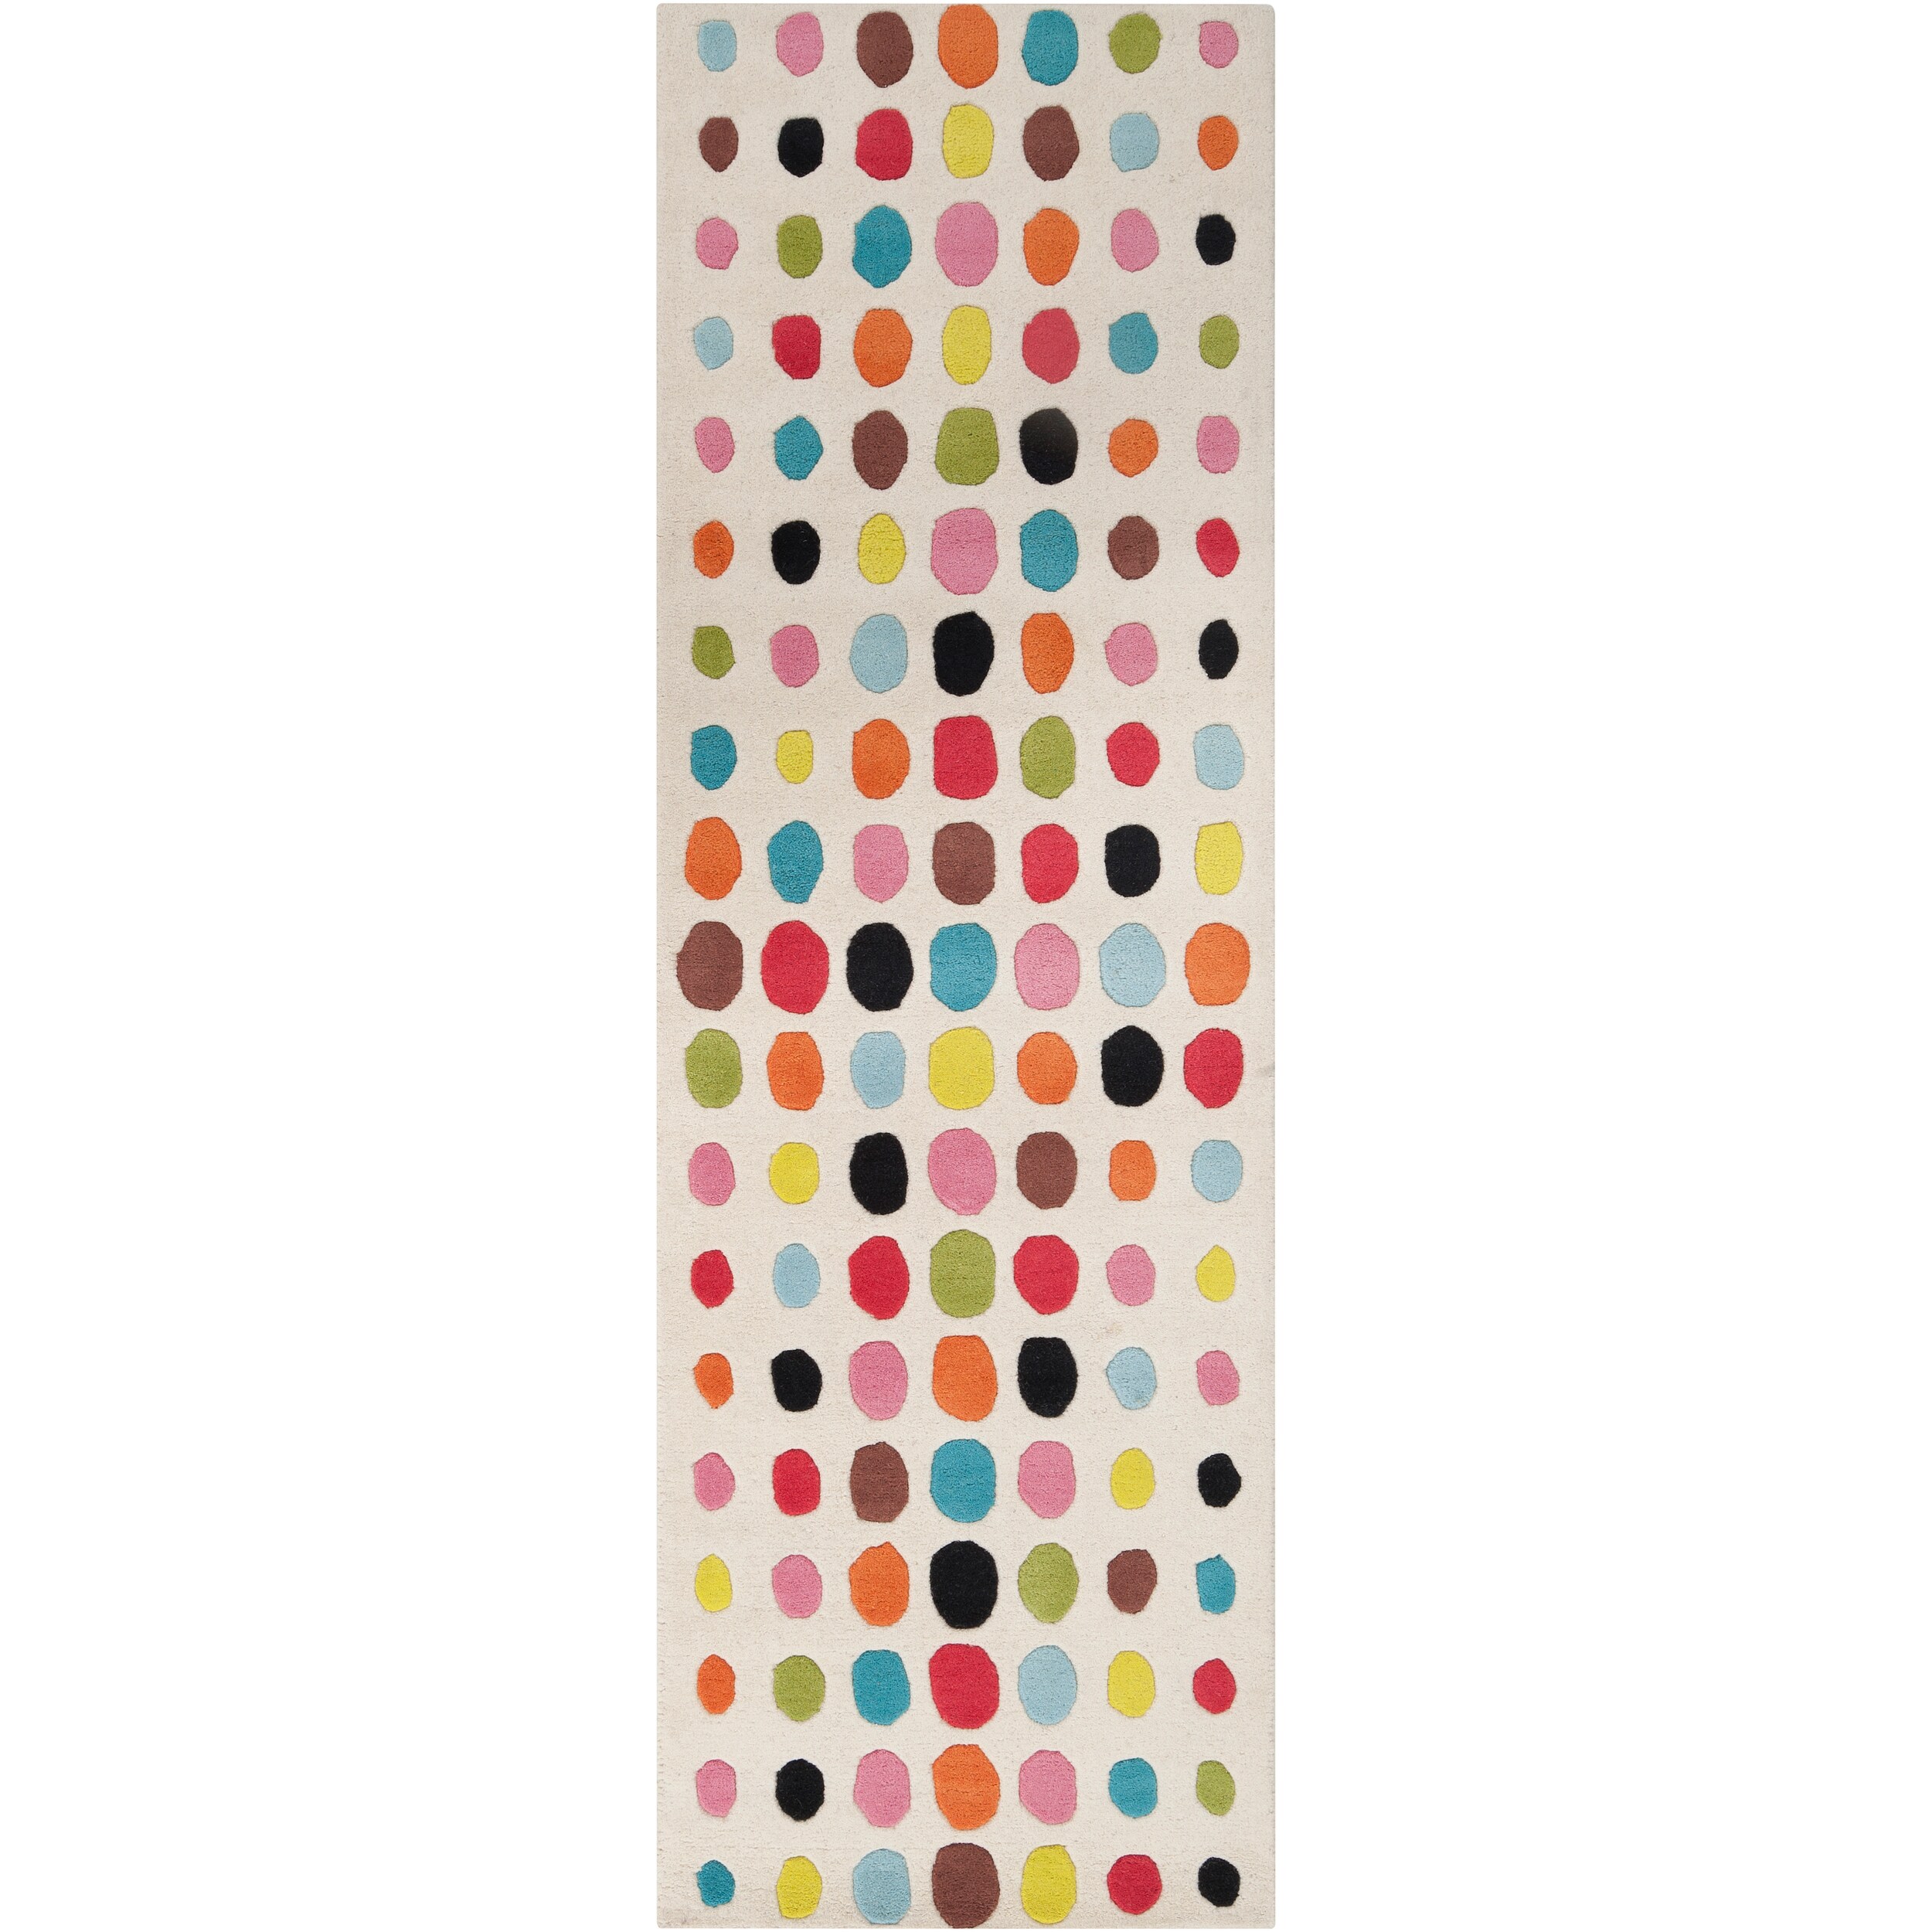 Tepper Jackson Hand tufted White Contemporary Multi Colored Circles Dream Wool Rug (26 X 8)